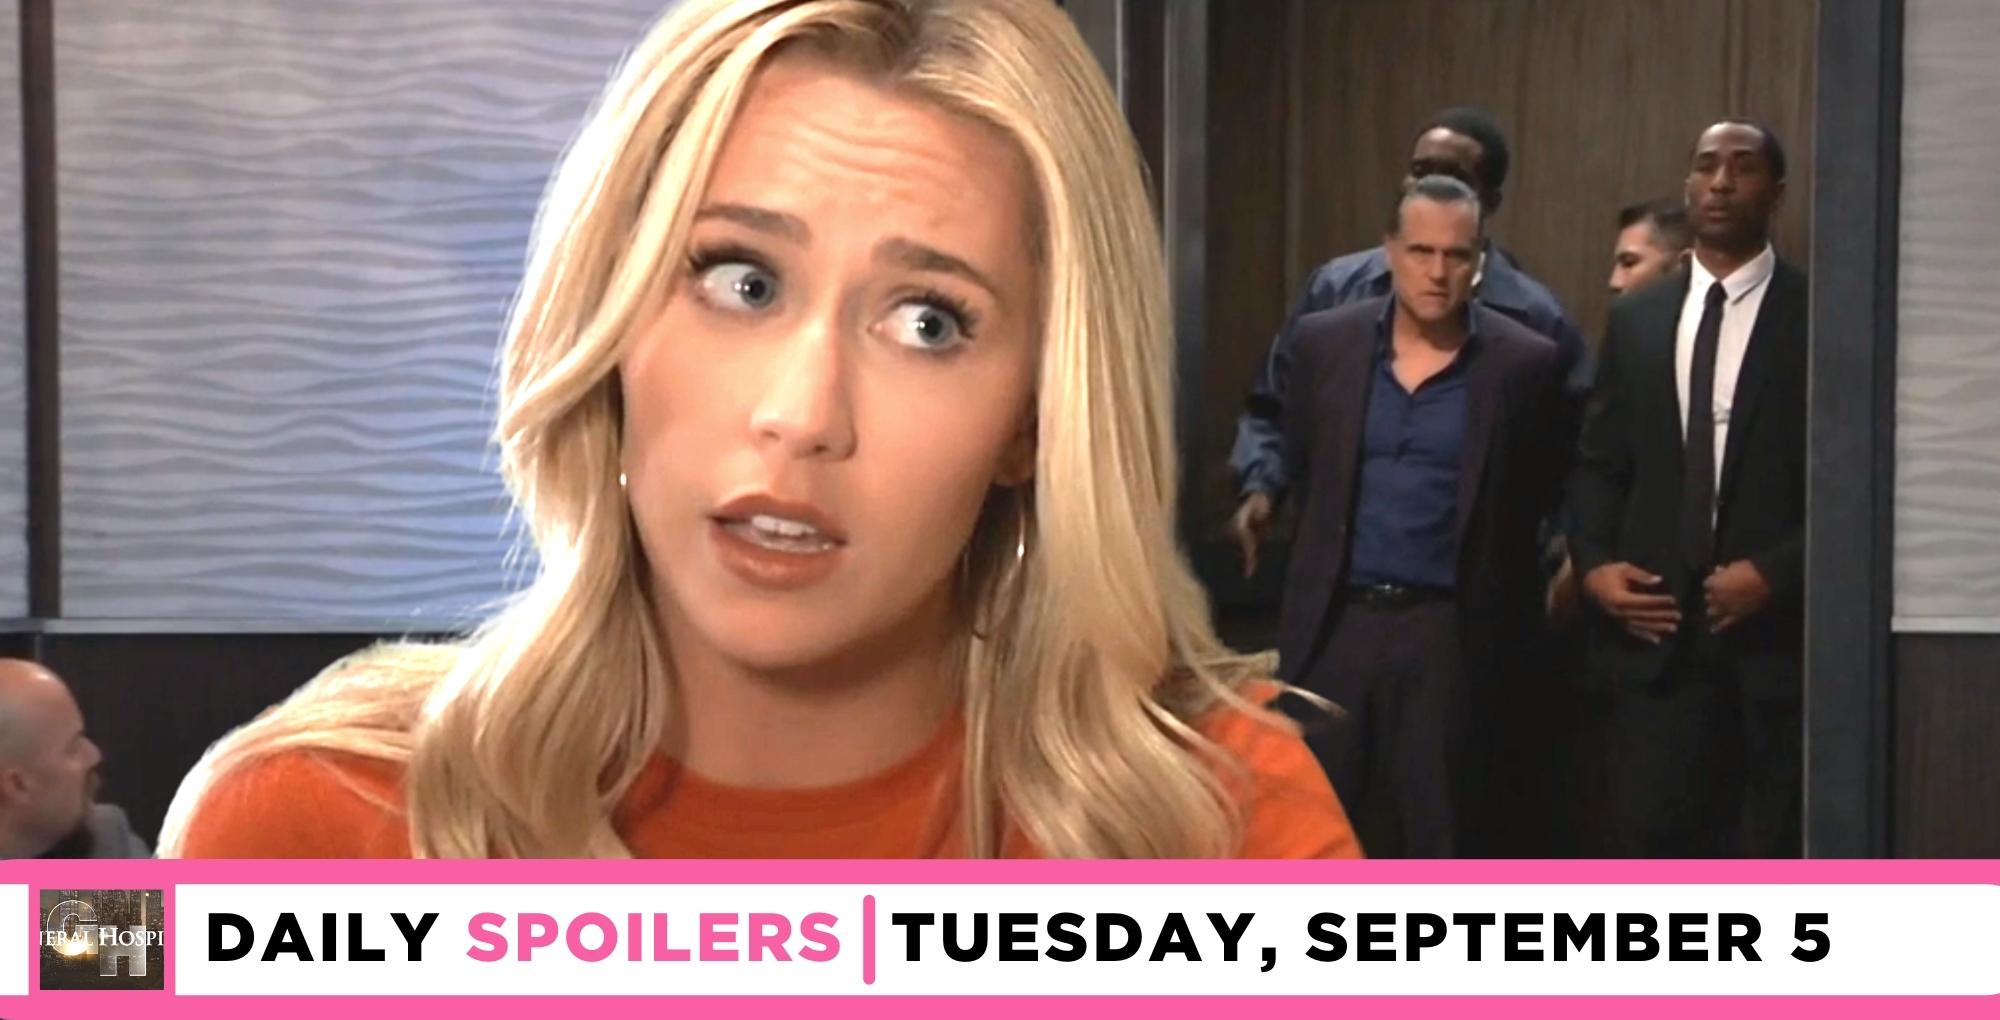 general hospital spoilers for september 5, 2023, has joss in front and sonny's arrest in the background.